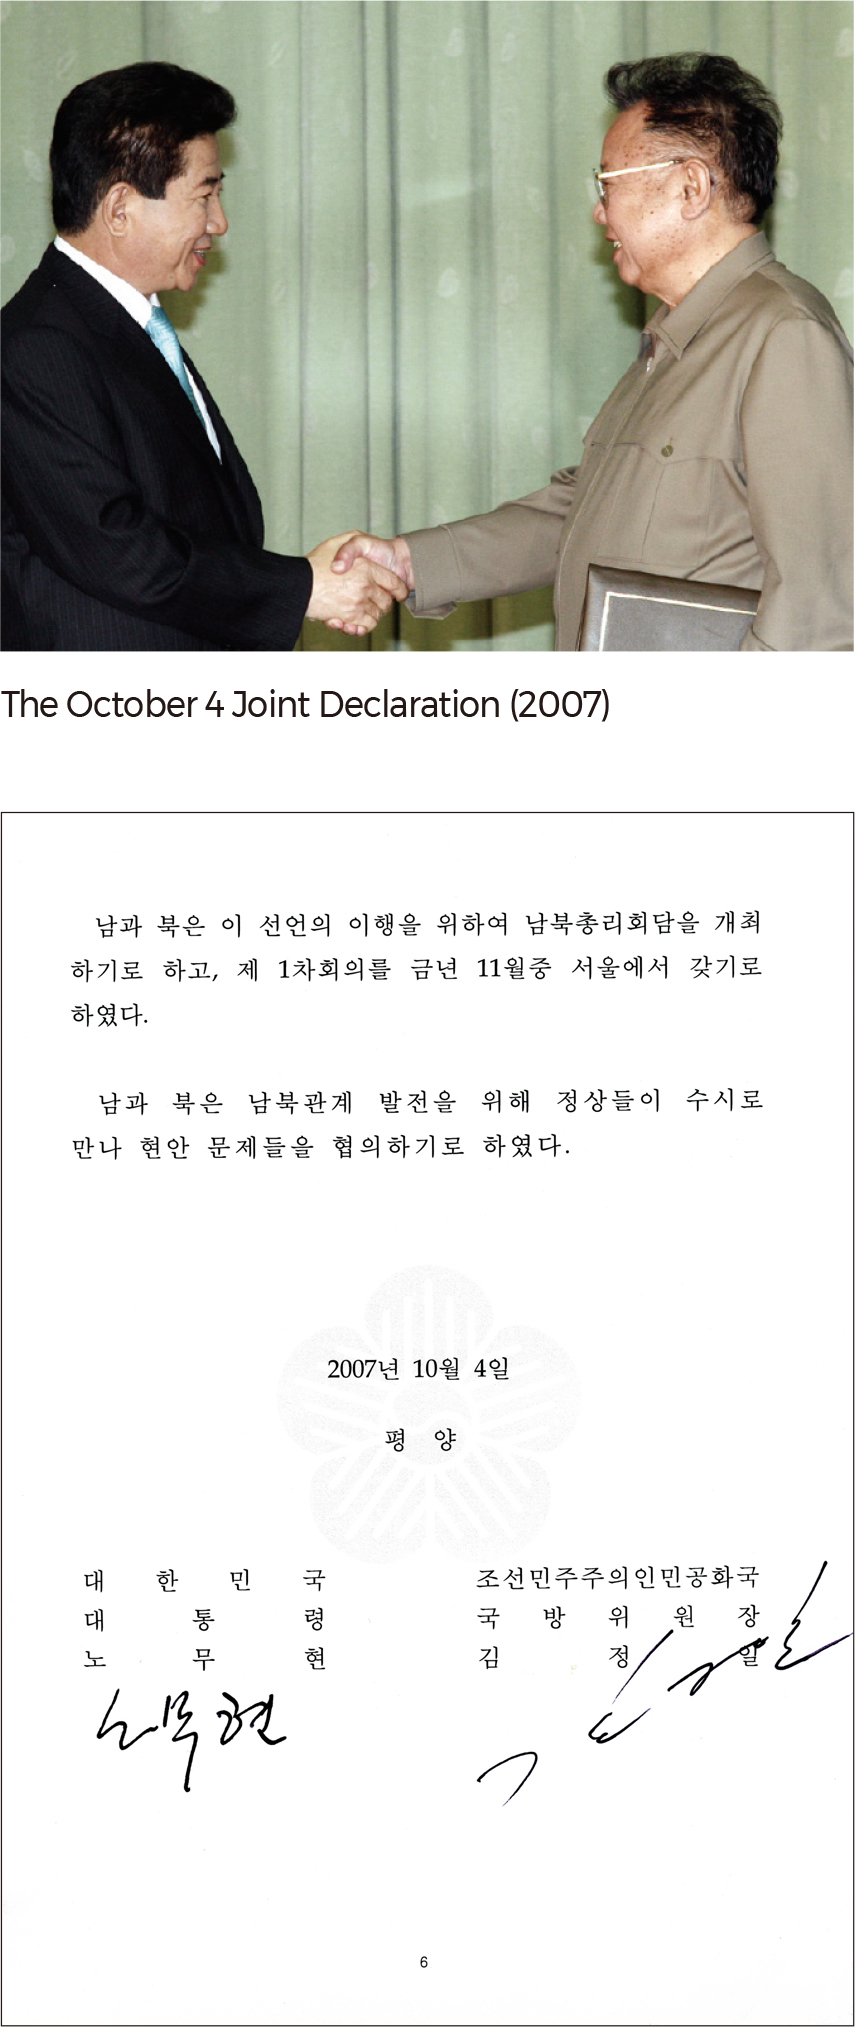 The October 4 Joint Declaration (2007)